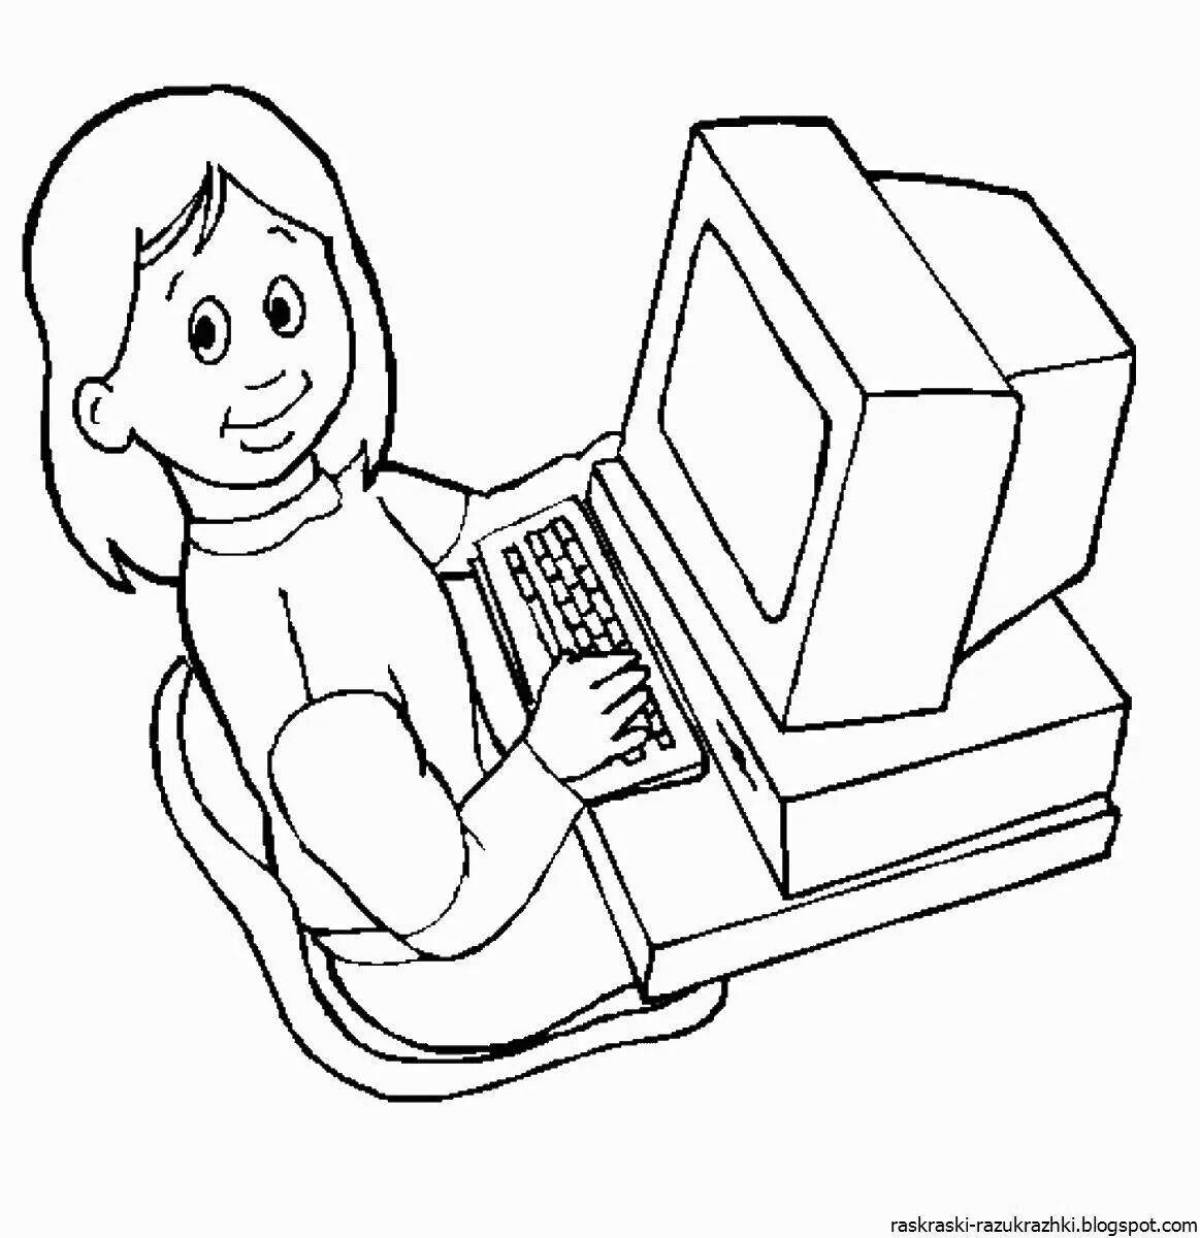 Awesome computer coloring for girls